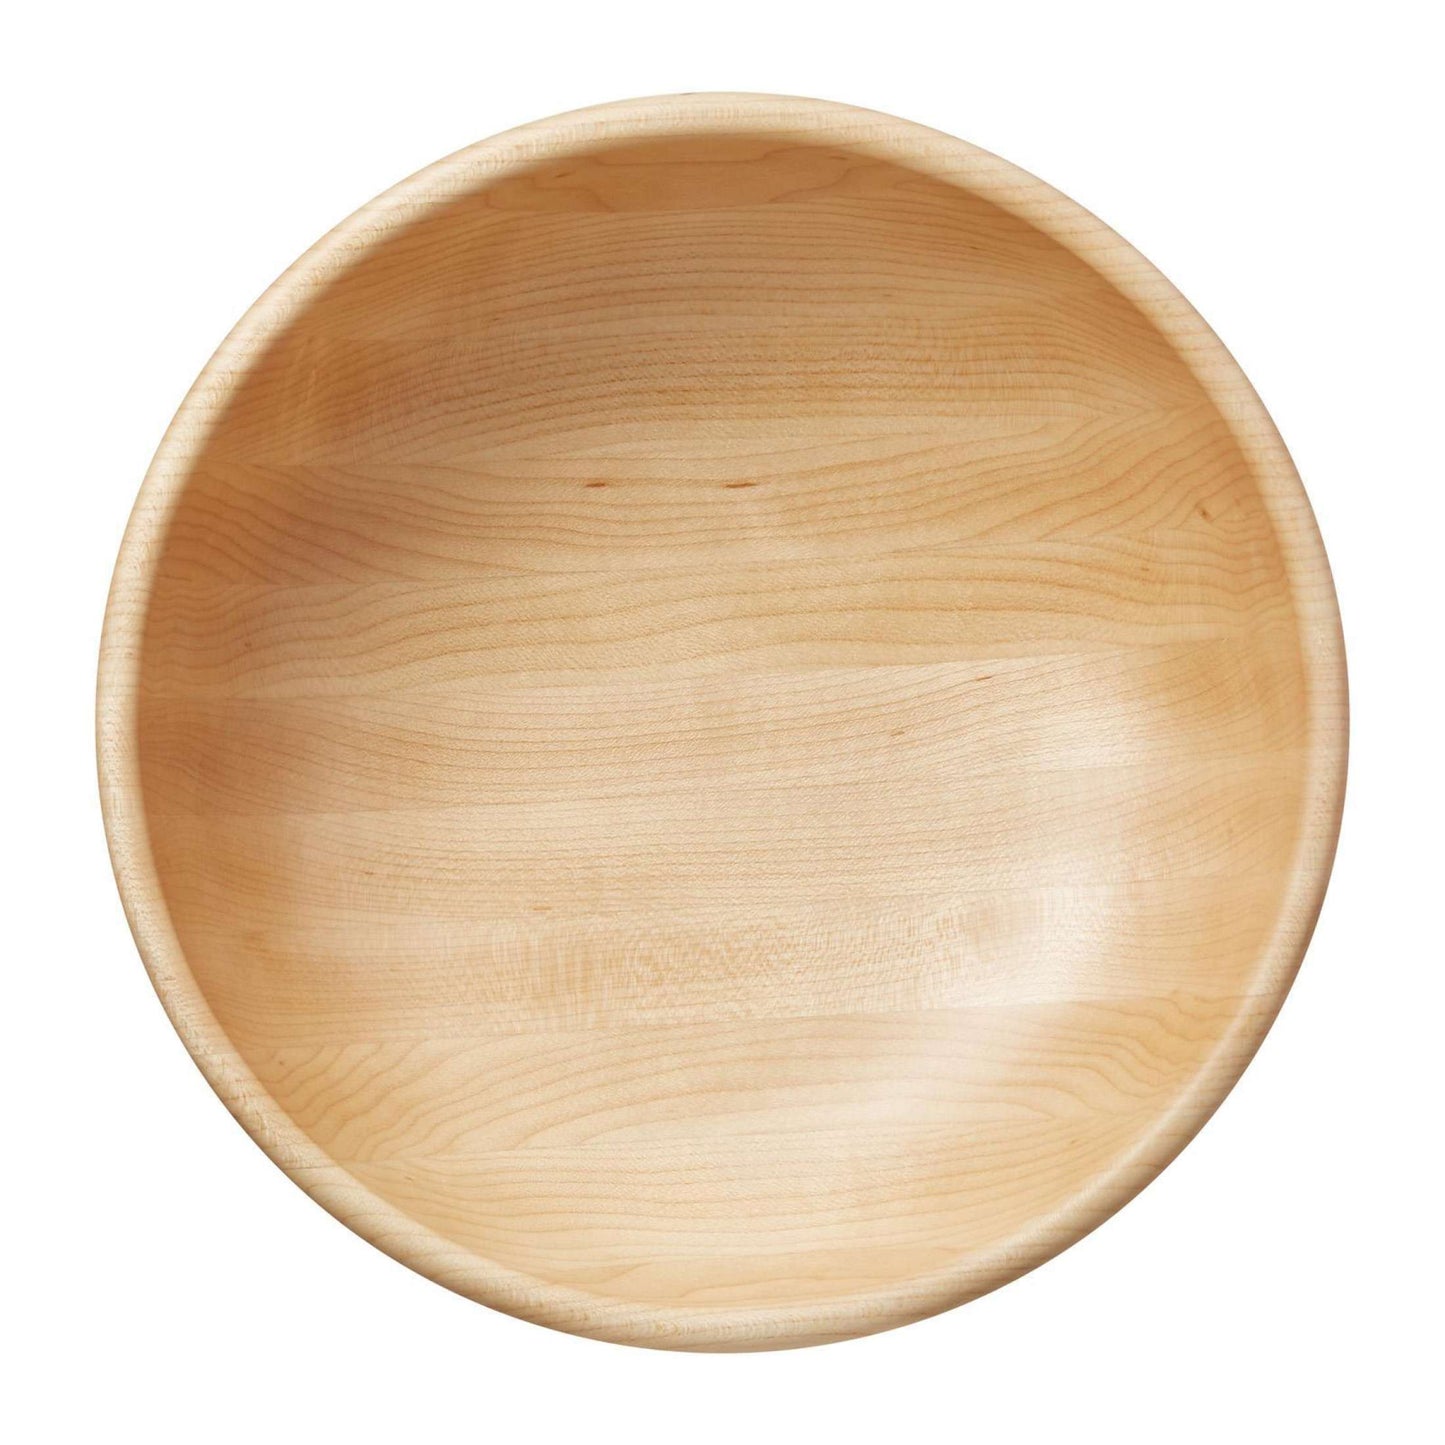 Frontiera Maplewood Salad Bowl 230mm [SOLD OUT]